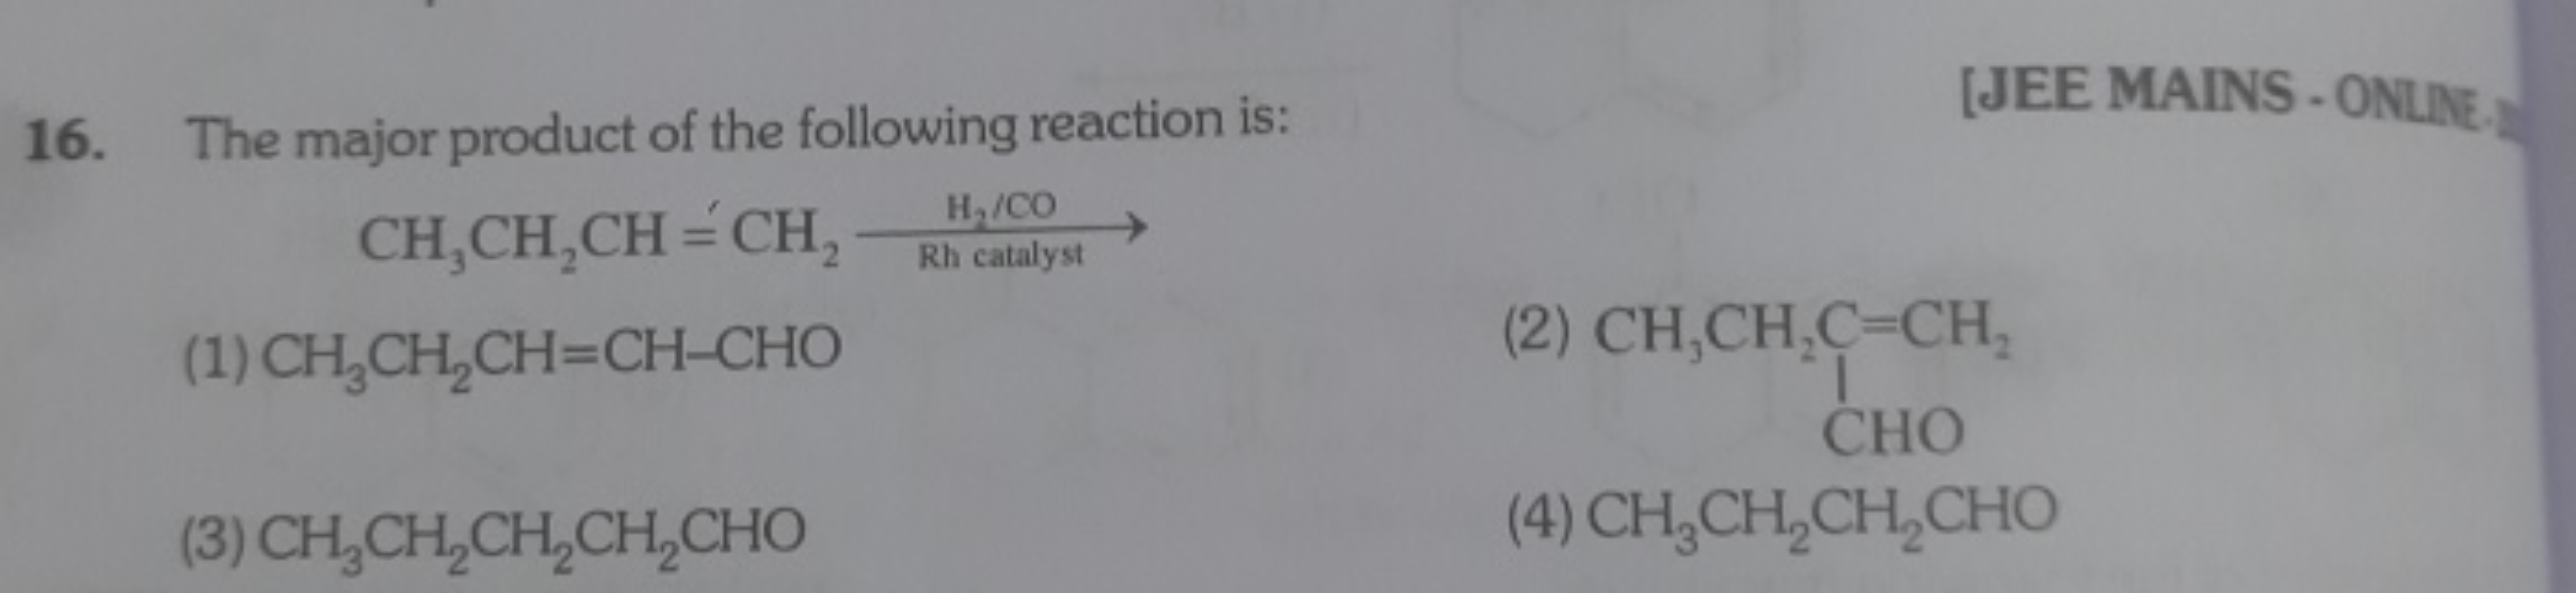 16. The major product of the following reaction is:
[JEE MAINS - ONLIE